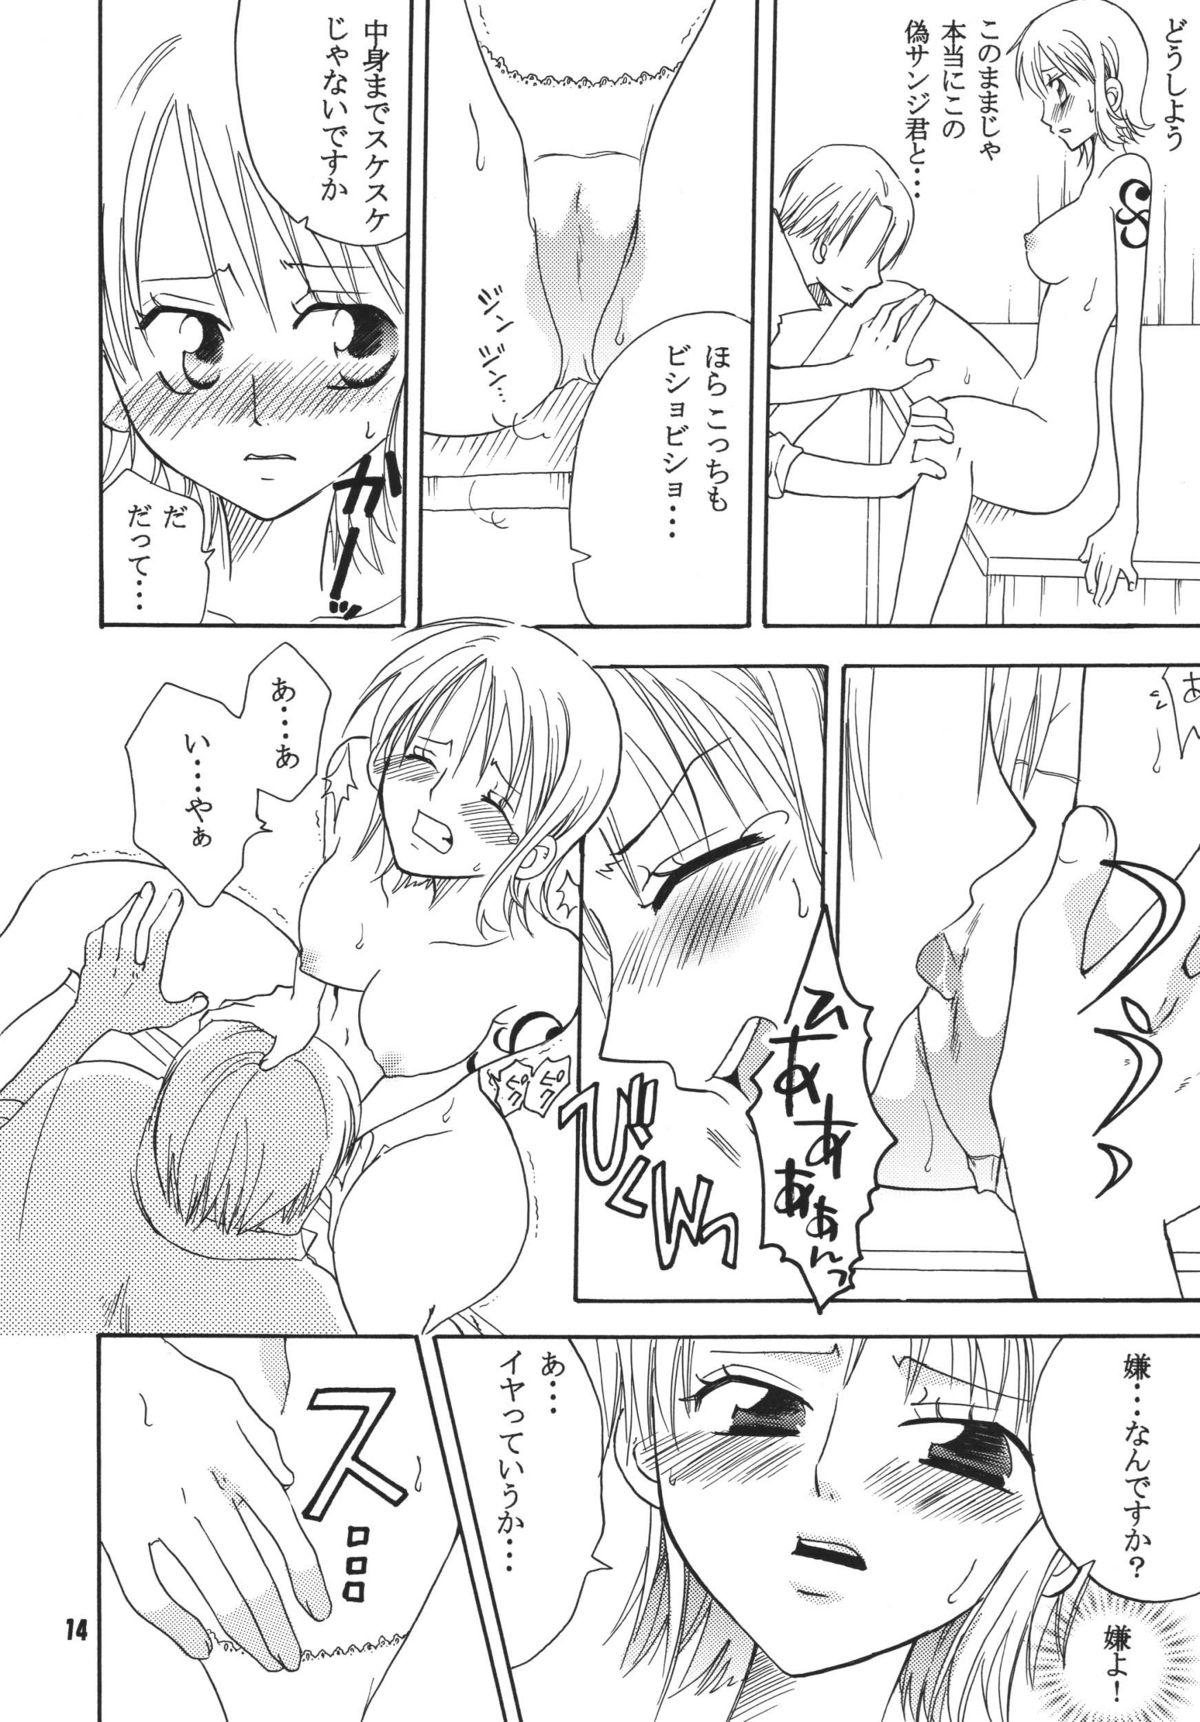 Pussylicking Kaizoku Musume. DX - One piece Blowjobs - Page 13